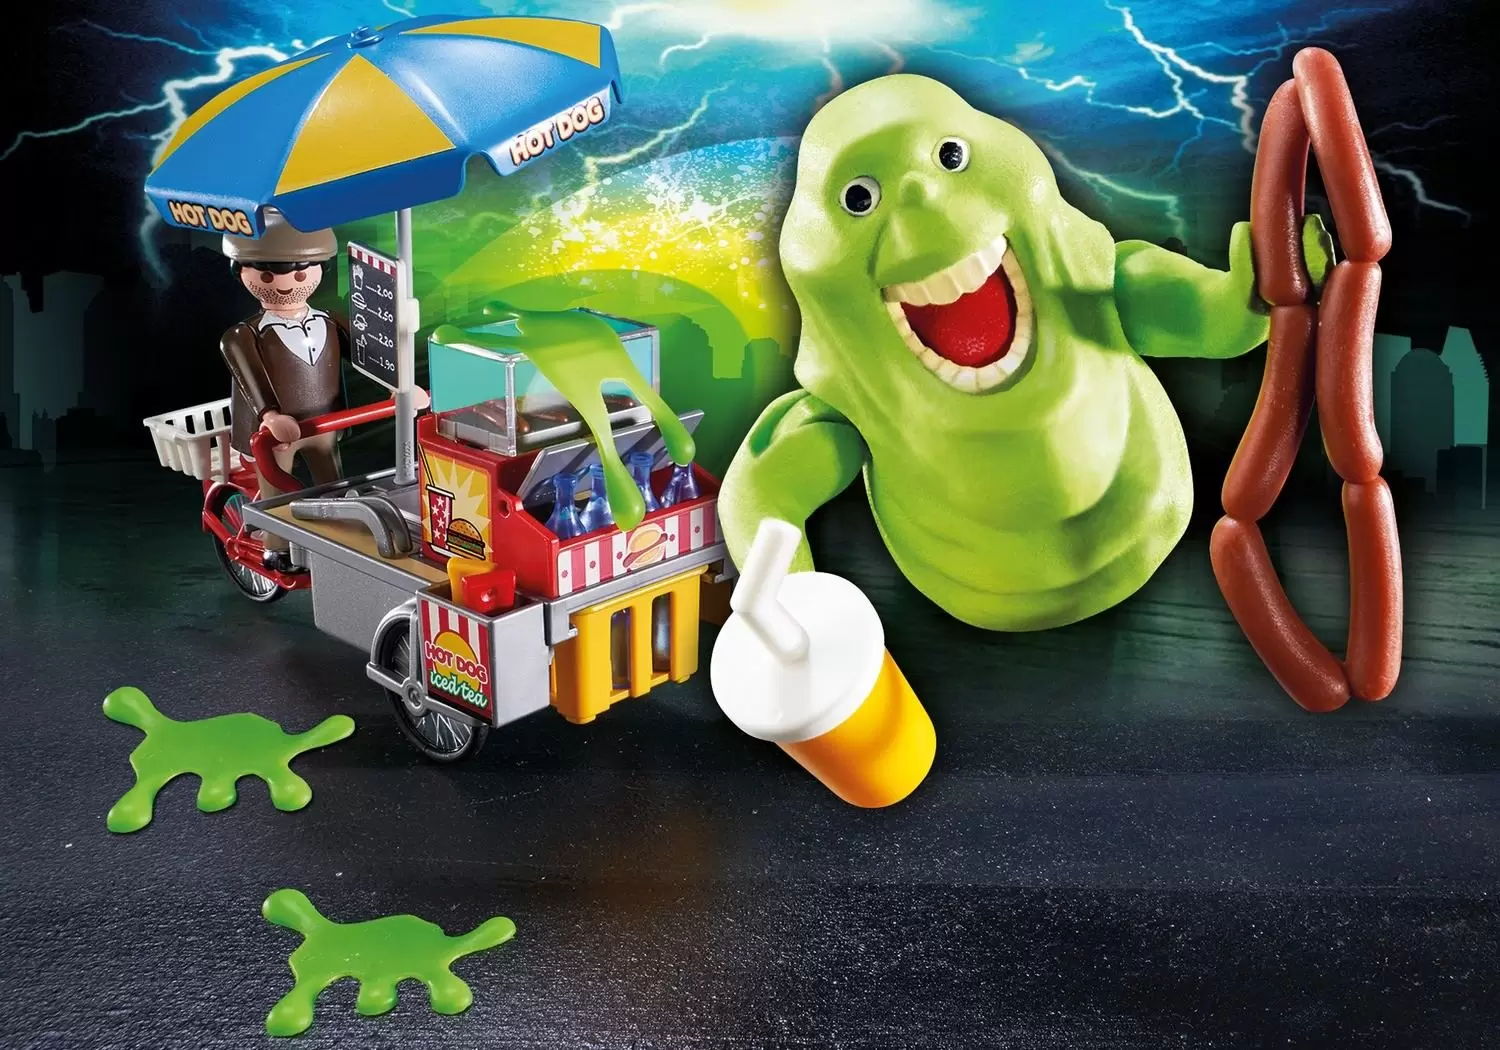 Playmobil Ghosbusters - Slimer with Hot Dog Stand